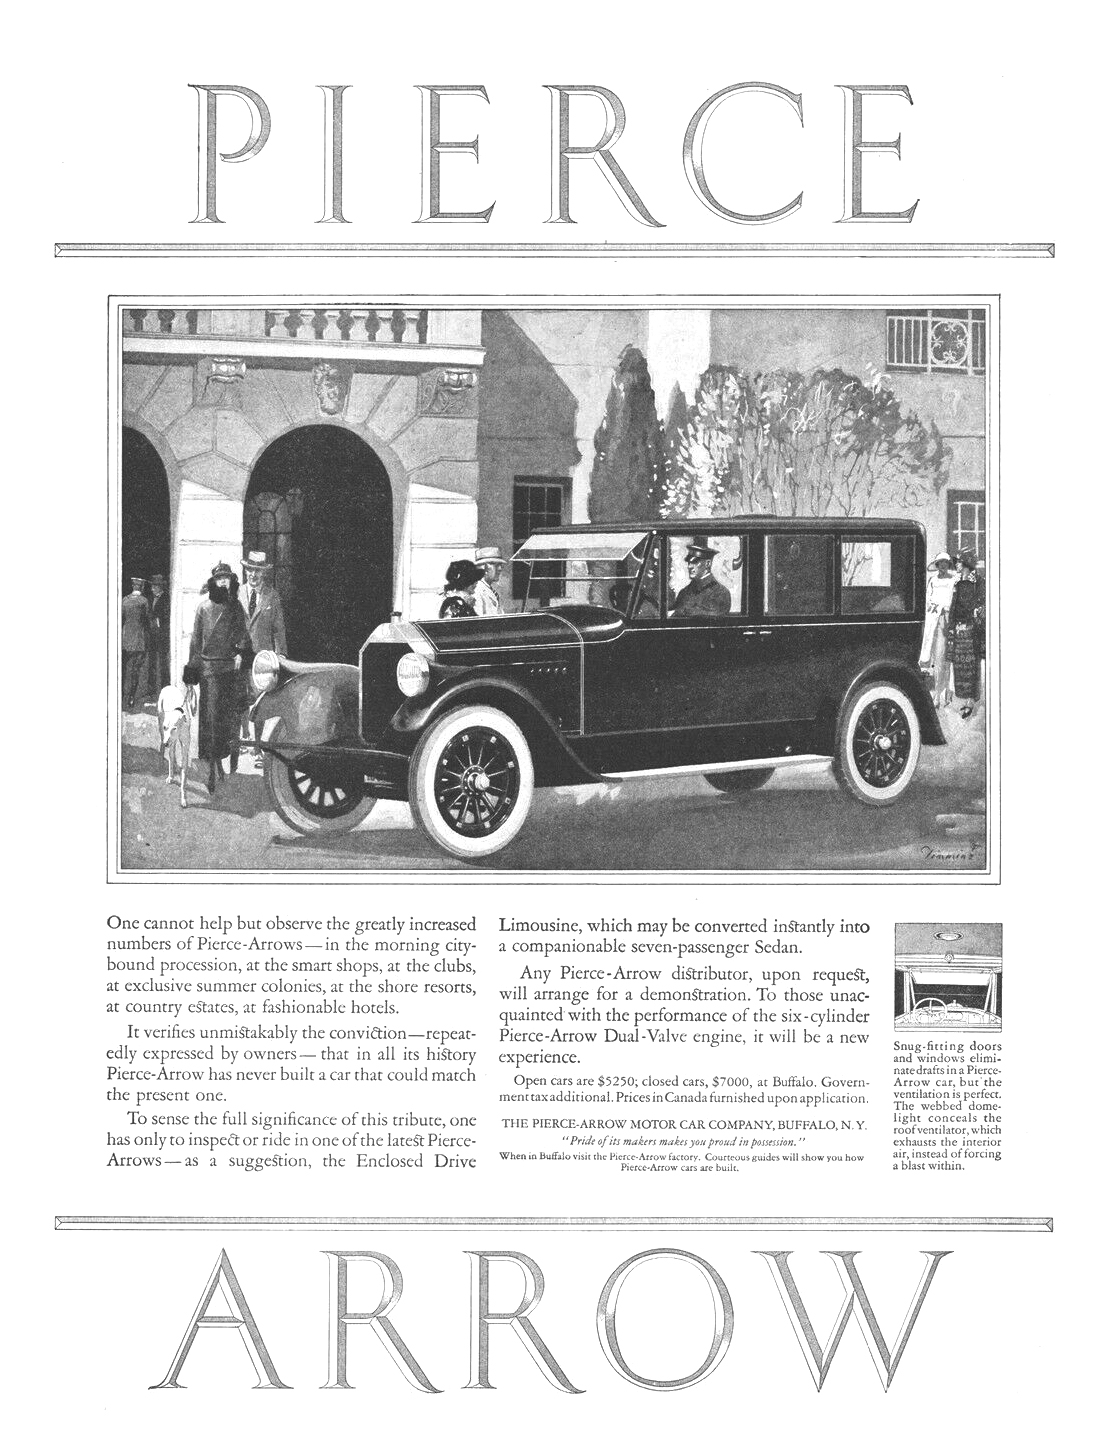 Pierce-Arrow Ad (1923) – Illustrated by Harry Laverne Timmins